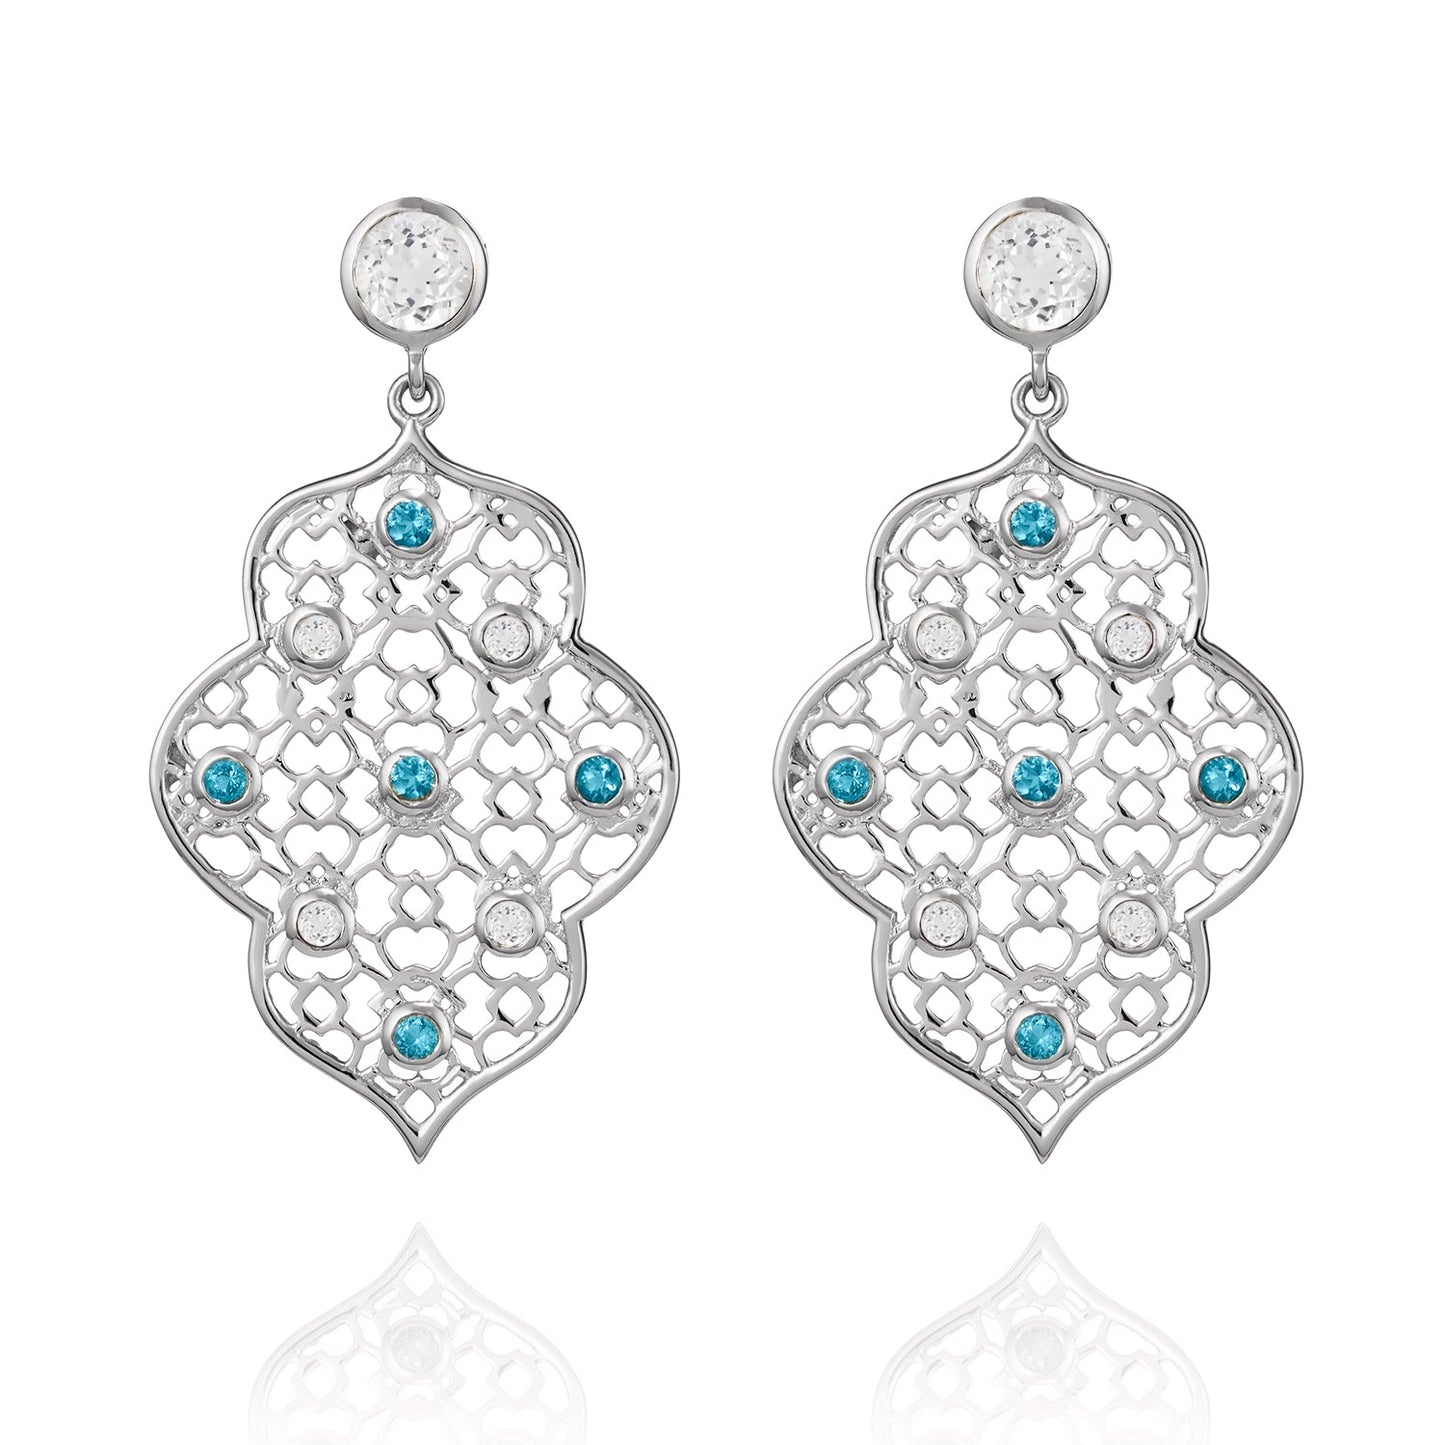 London-made luxury custom gold gemstone jewellery - Silver Filigree Earrings in White Topaz and Blue Topaz – Andalusian Collection, Augustine Jewellery, British Jewellers, Gemstone Jewellery, Luxury Jewellery London.